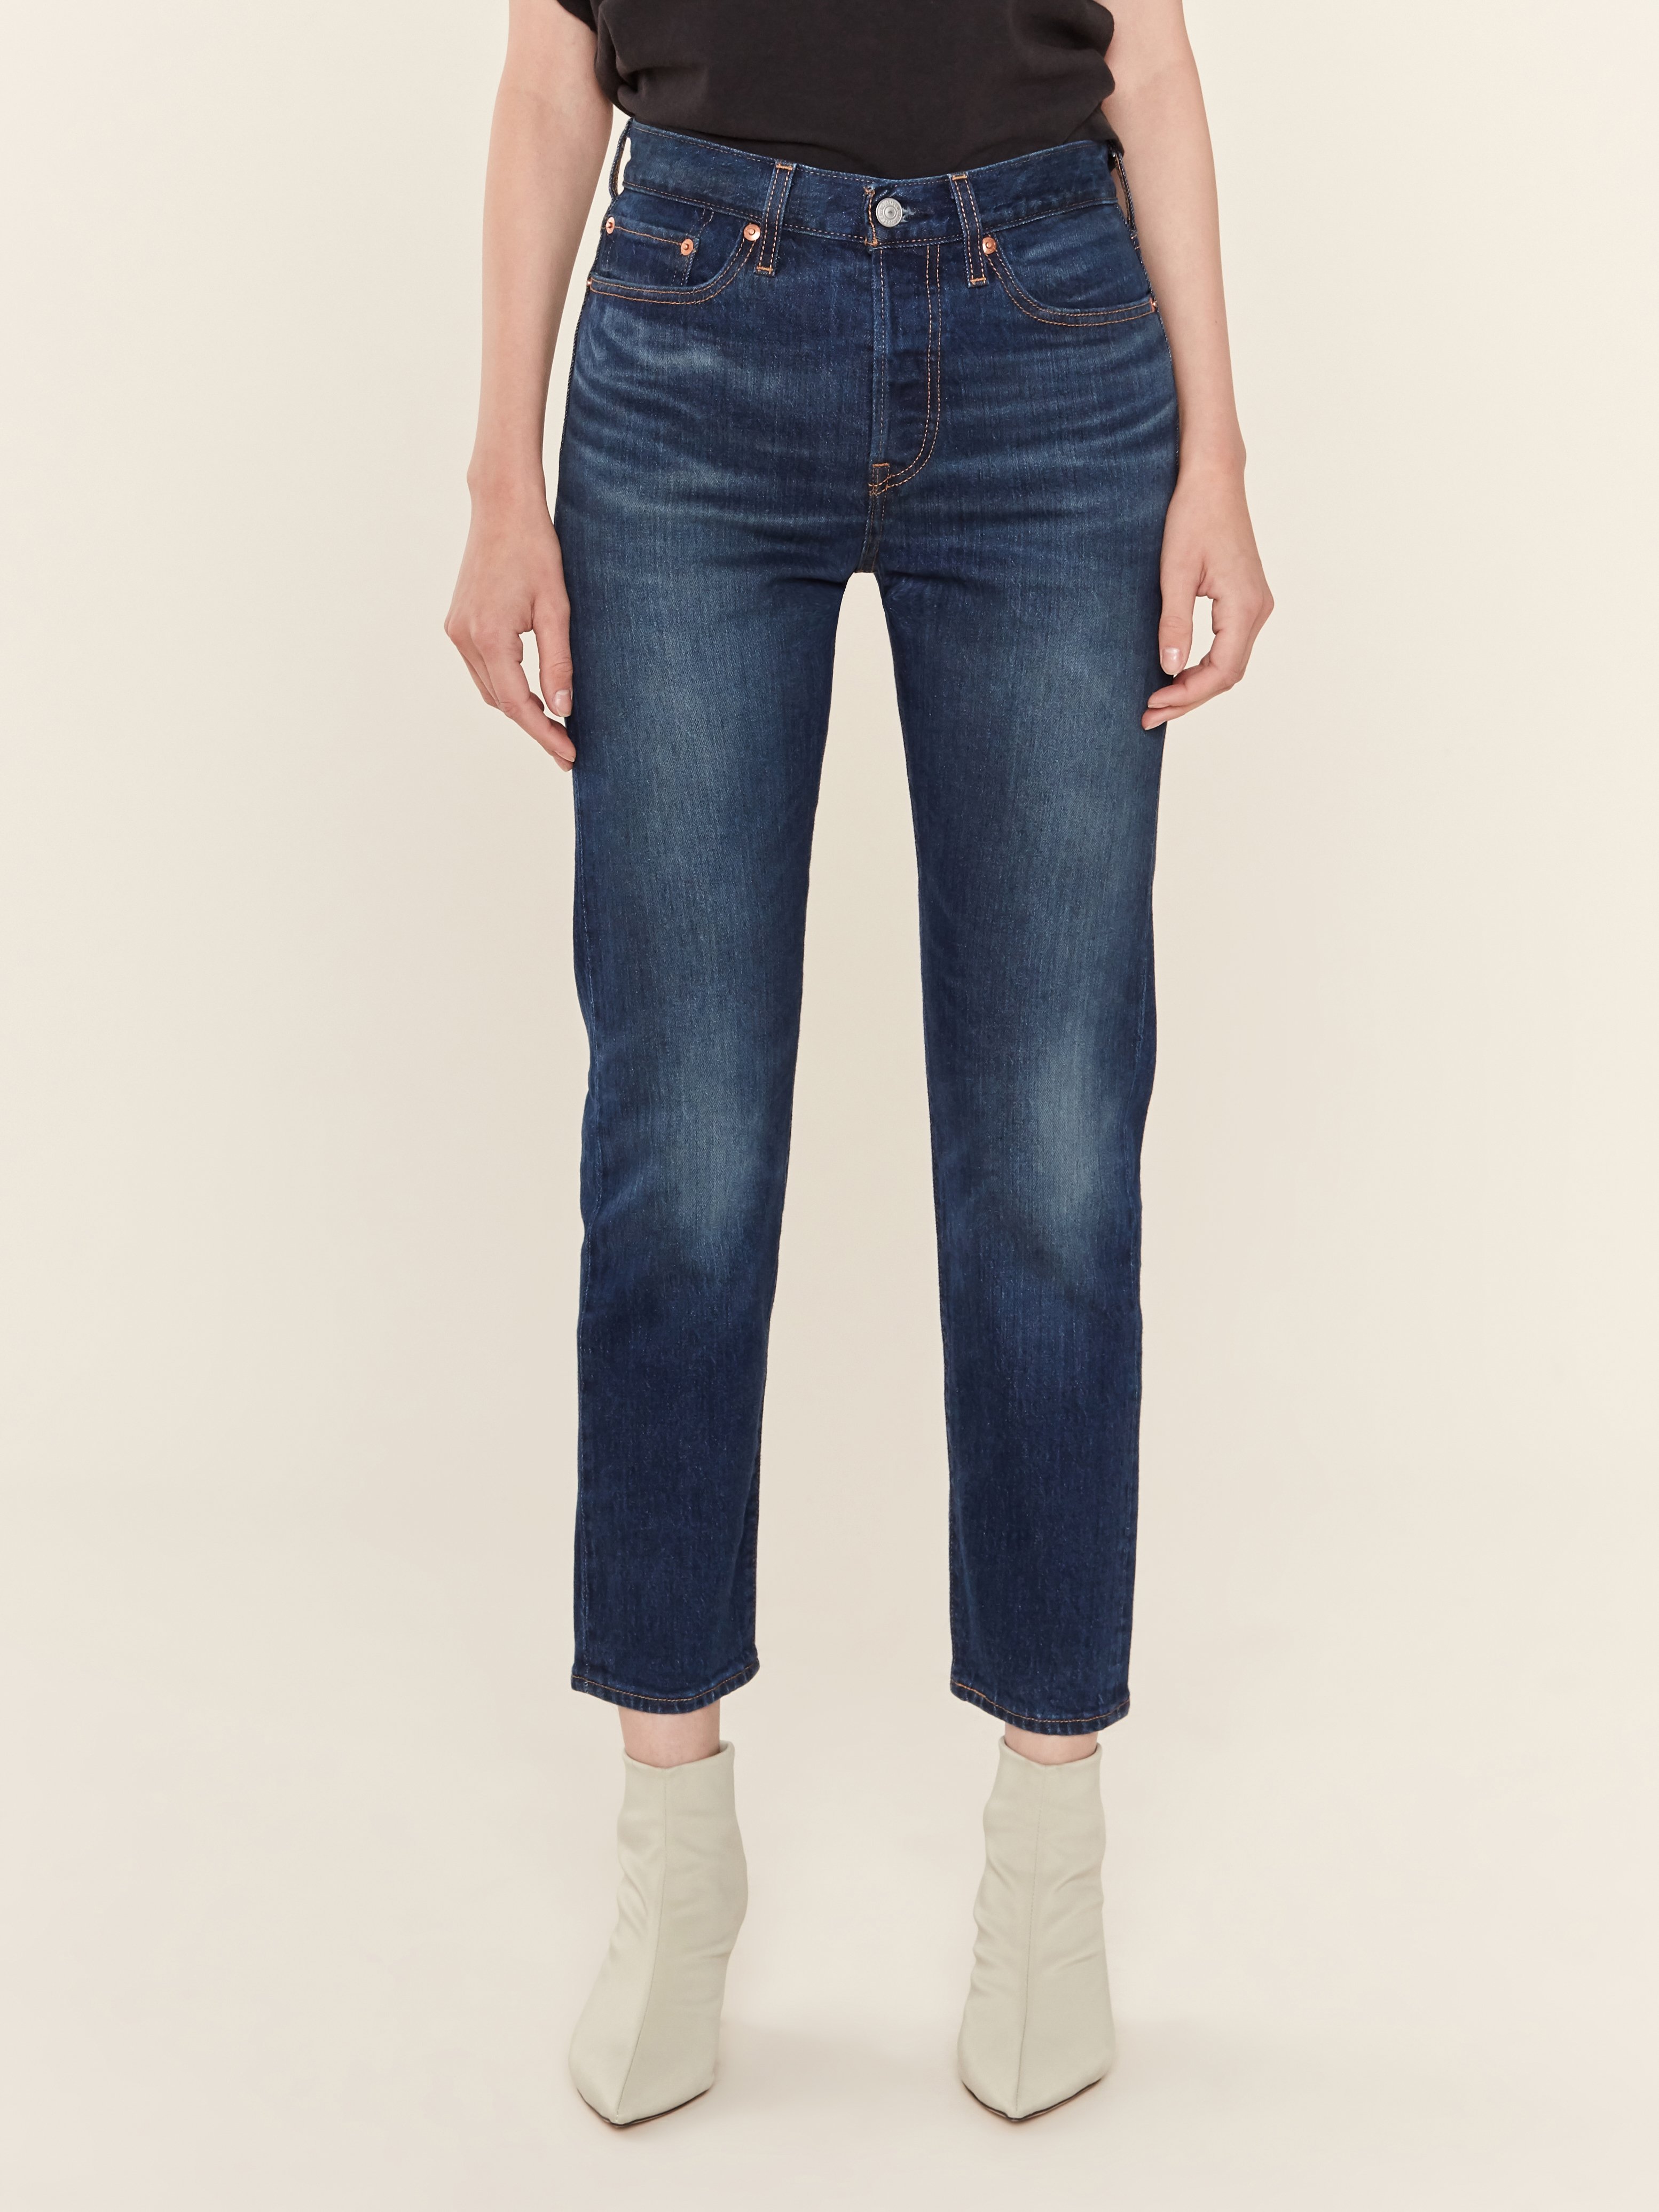 wedgie fit high rise jeans